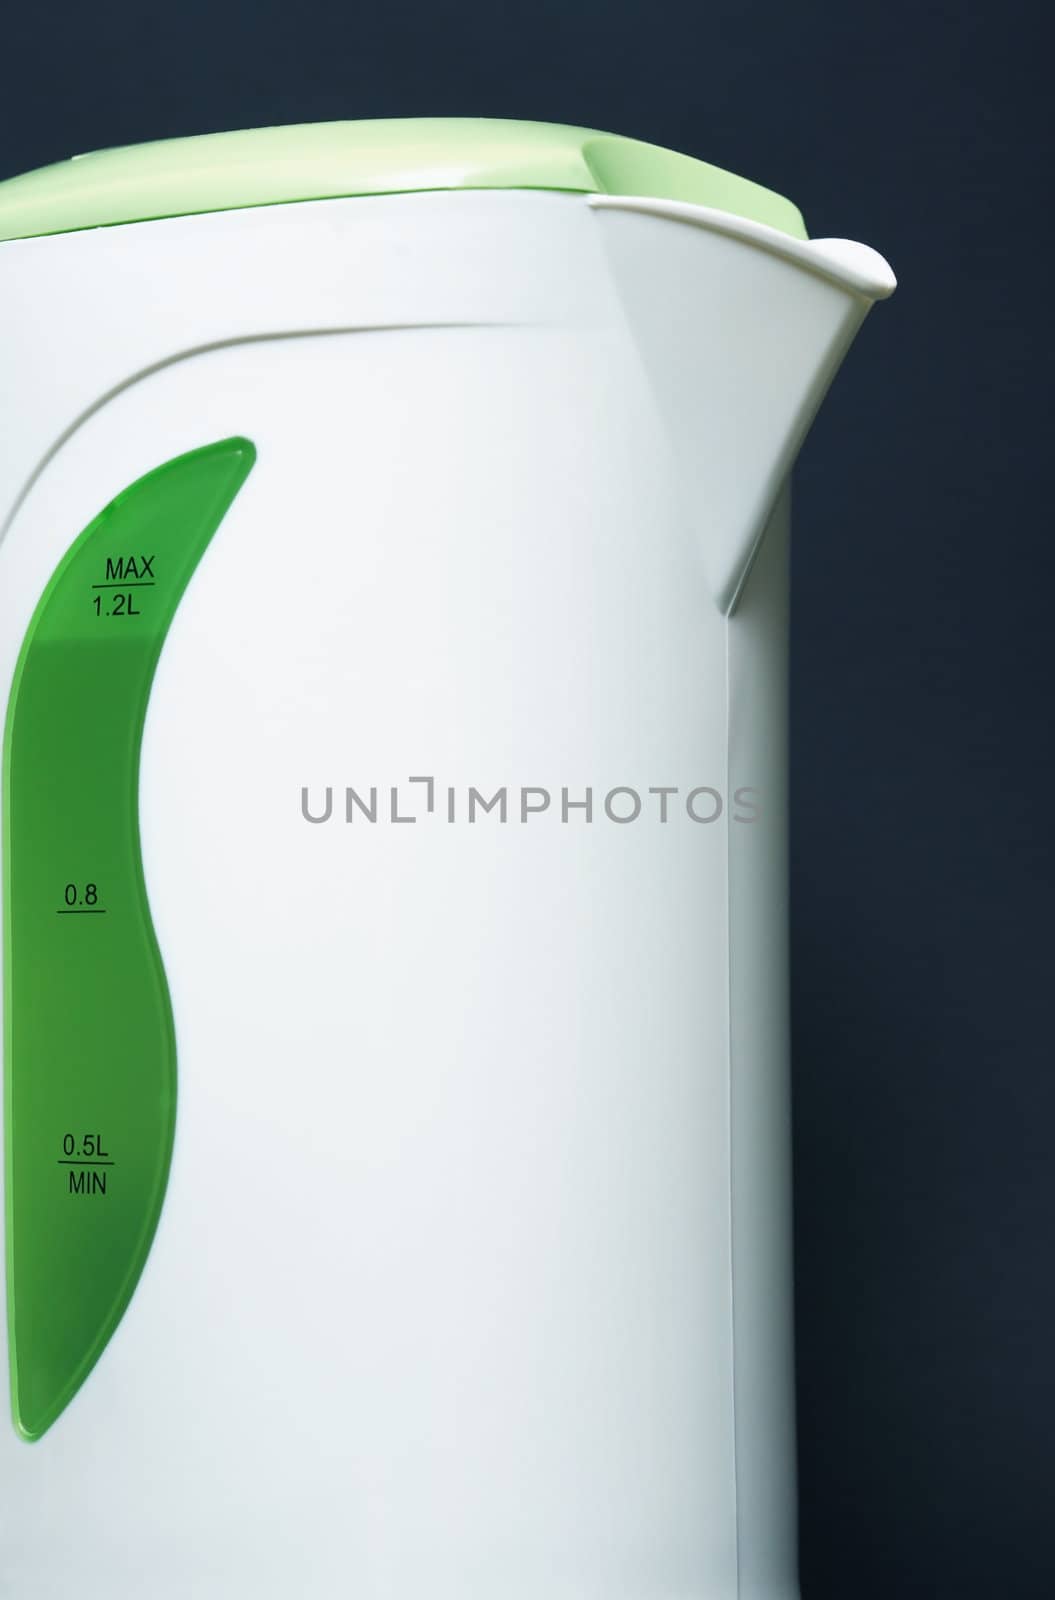 Extreme closeup of modern electric kettle on dark background